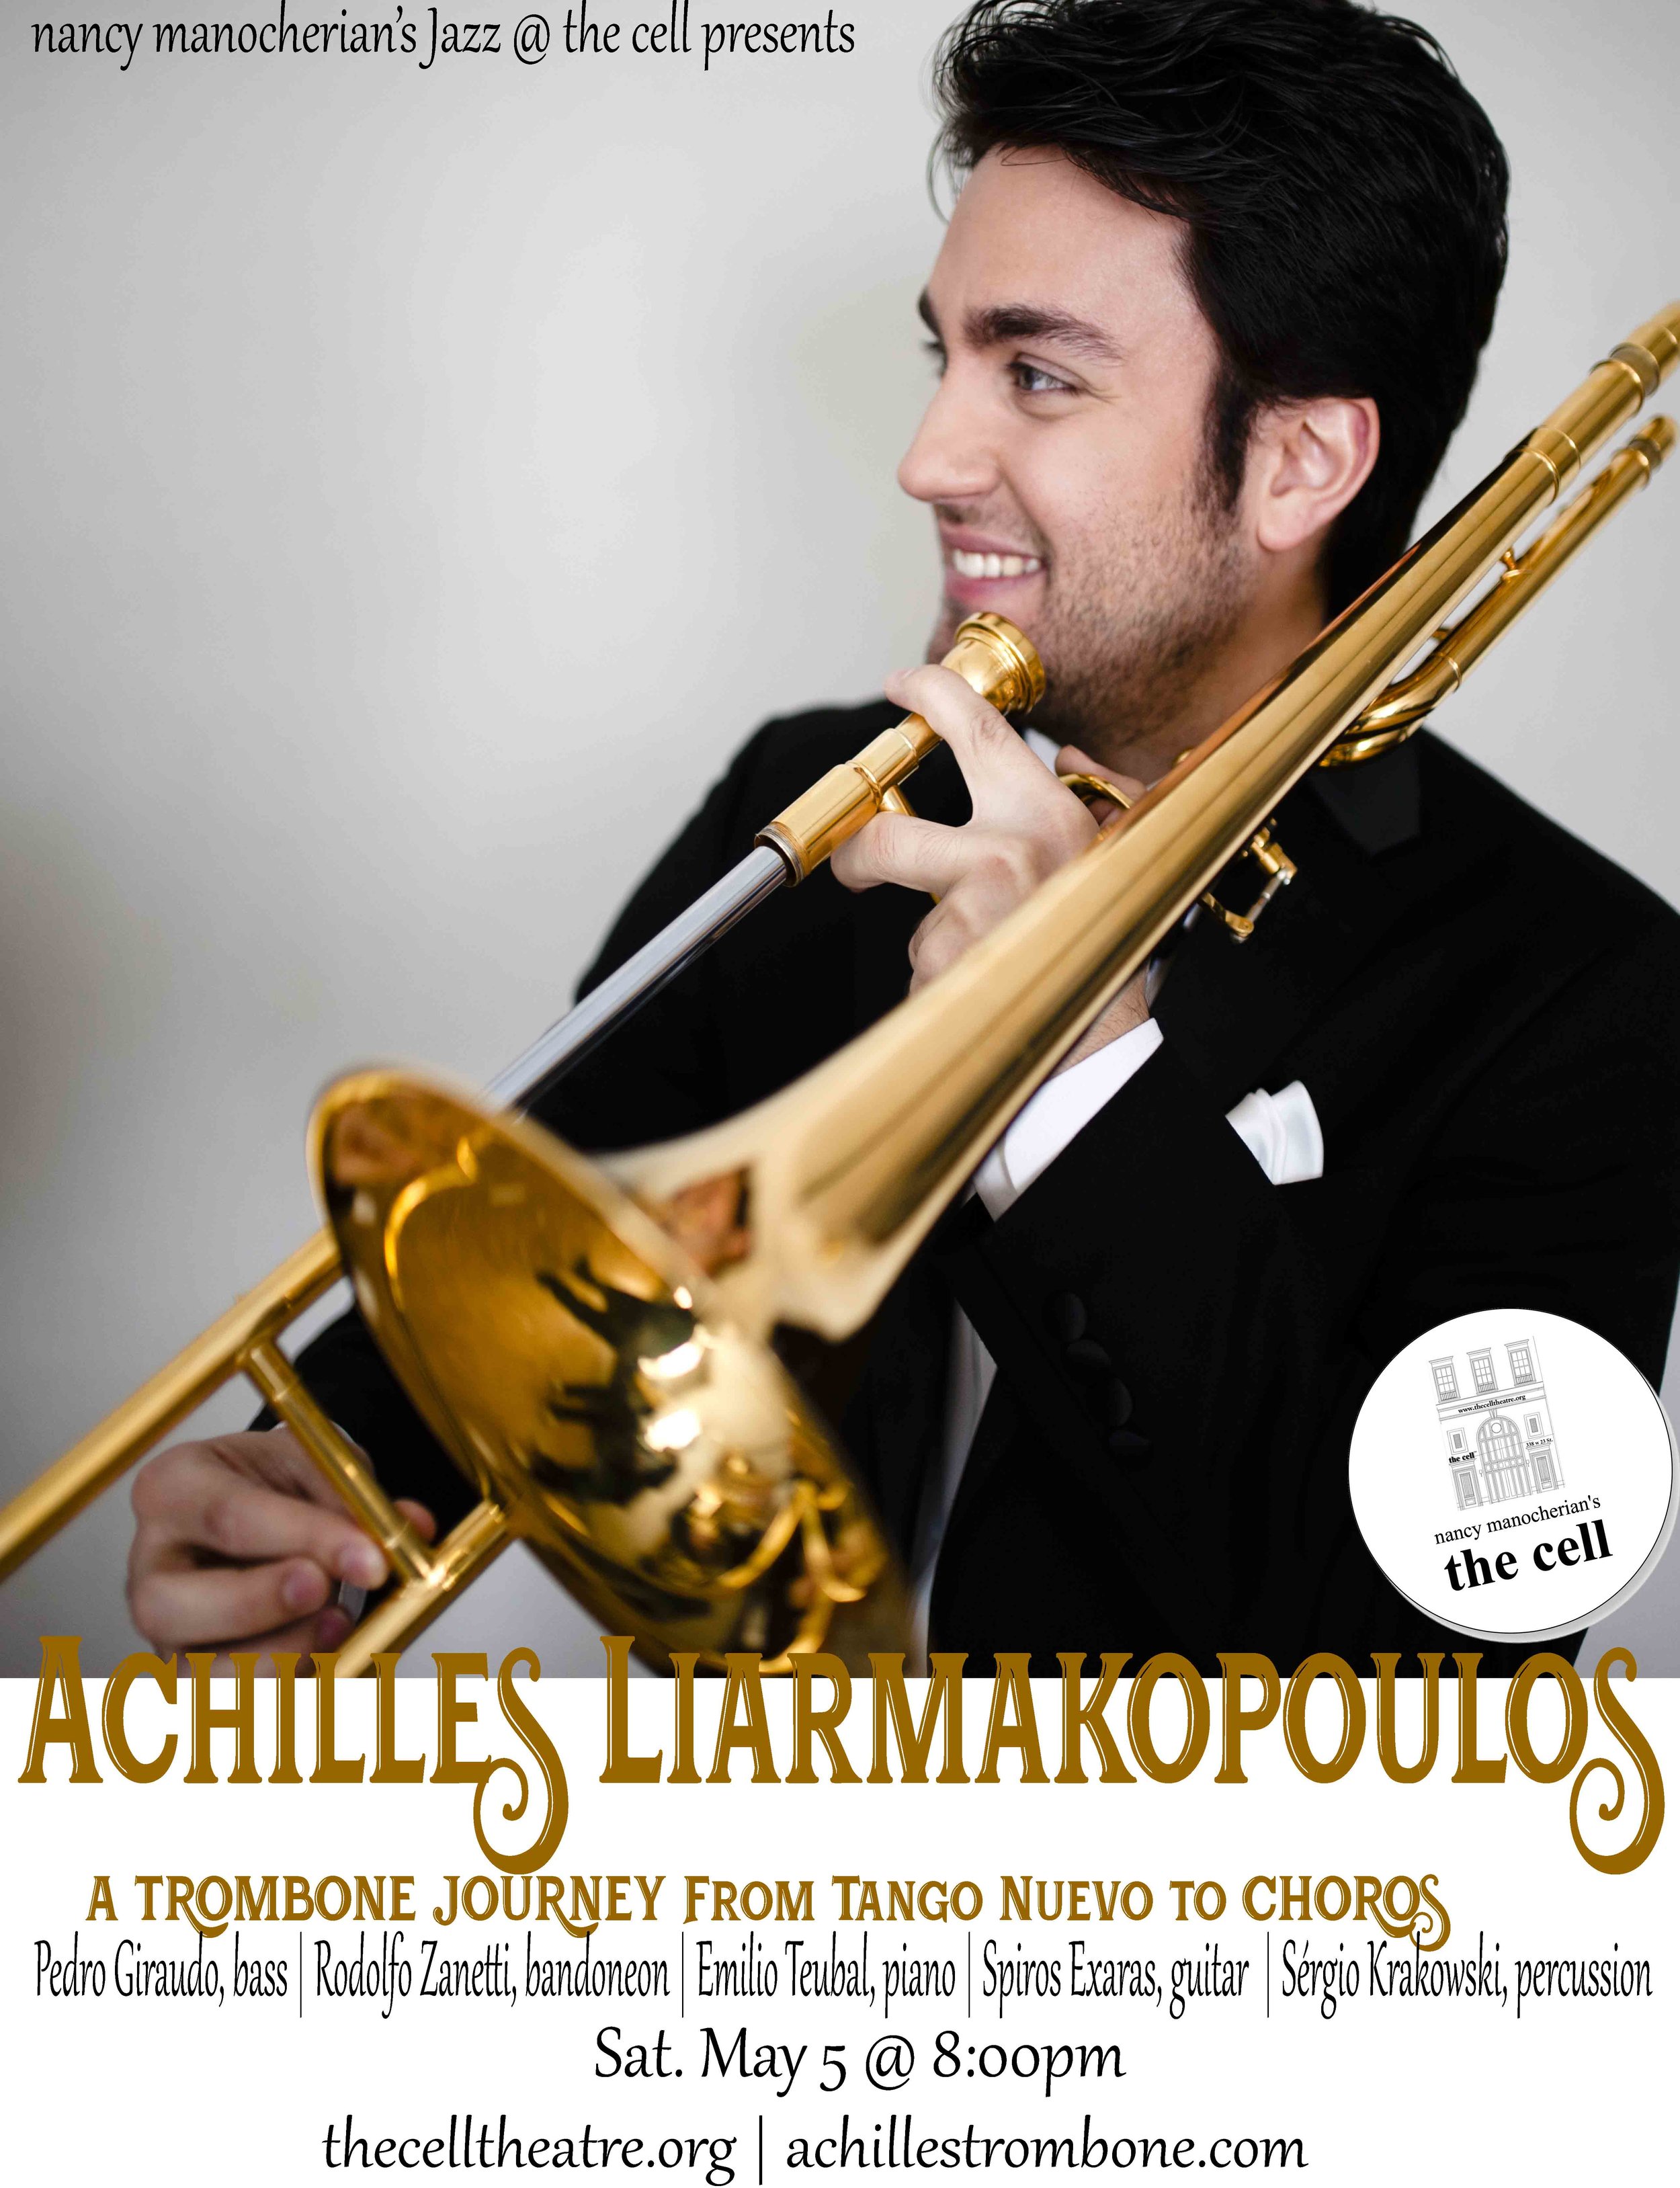 Achilles Liarmakopoulos: A trombone Journey From Tango Nuevo